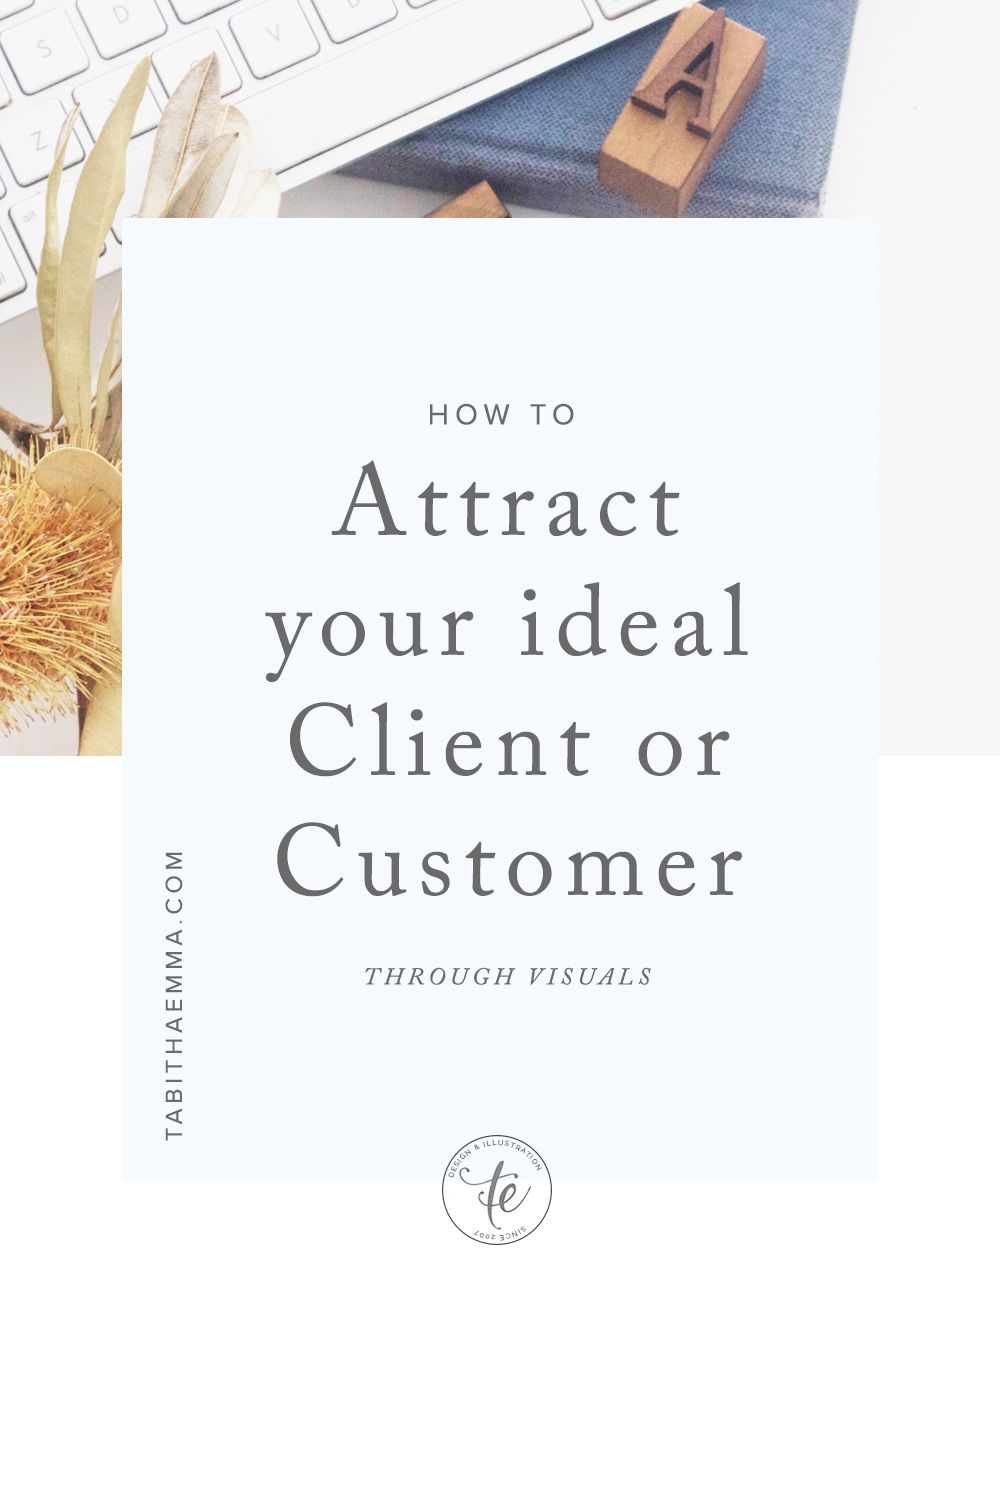 How to Attract your Ideal Customers and Clients using Visuals | Ideal